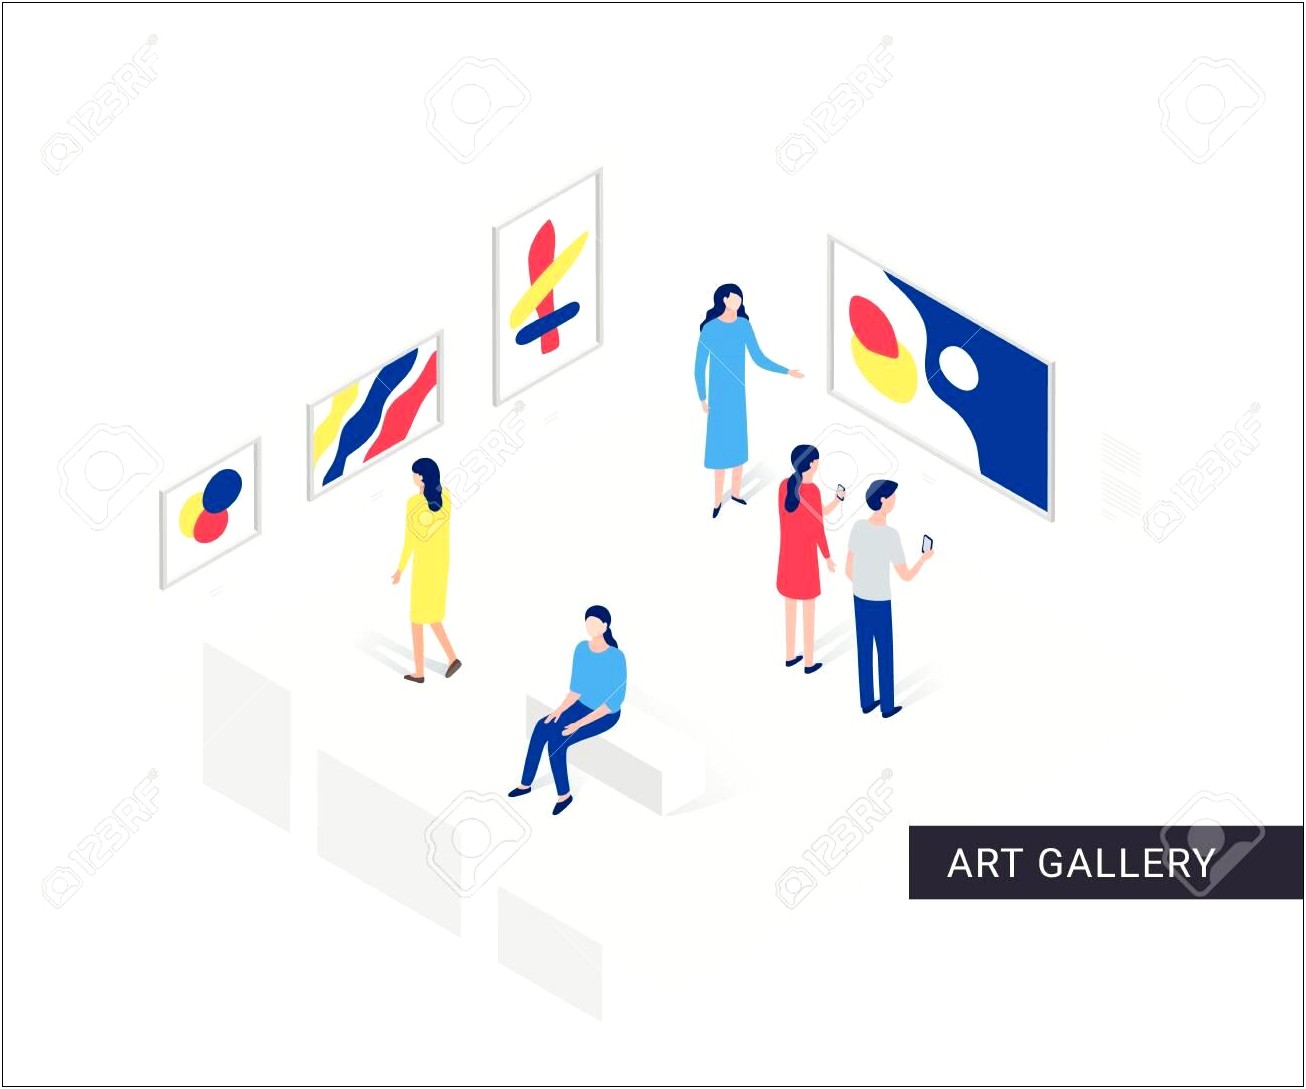 Free Bootstrap Templates For Artist Gallery